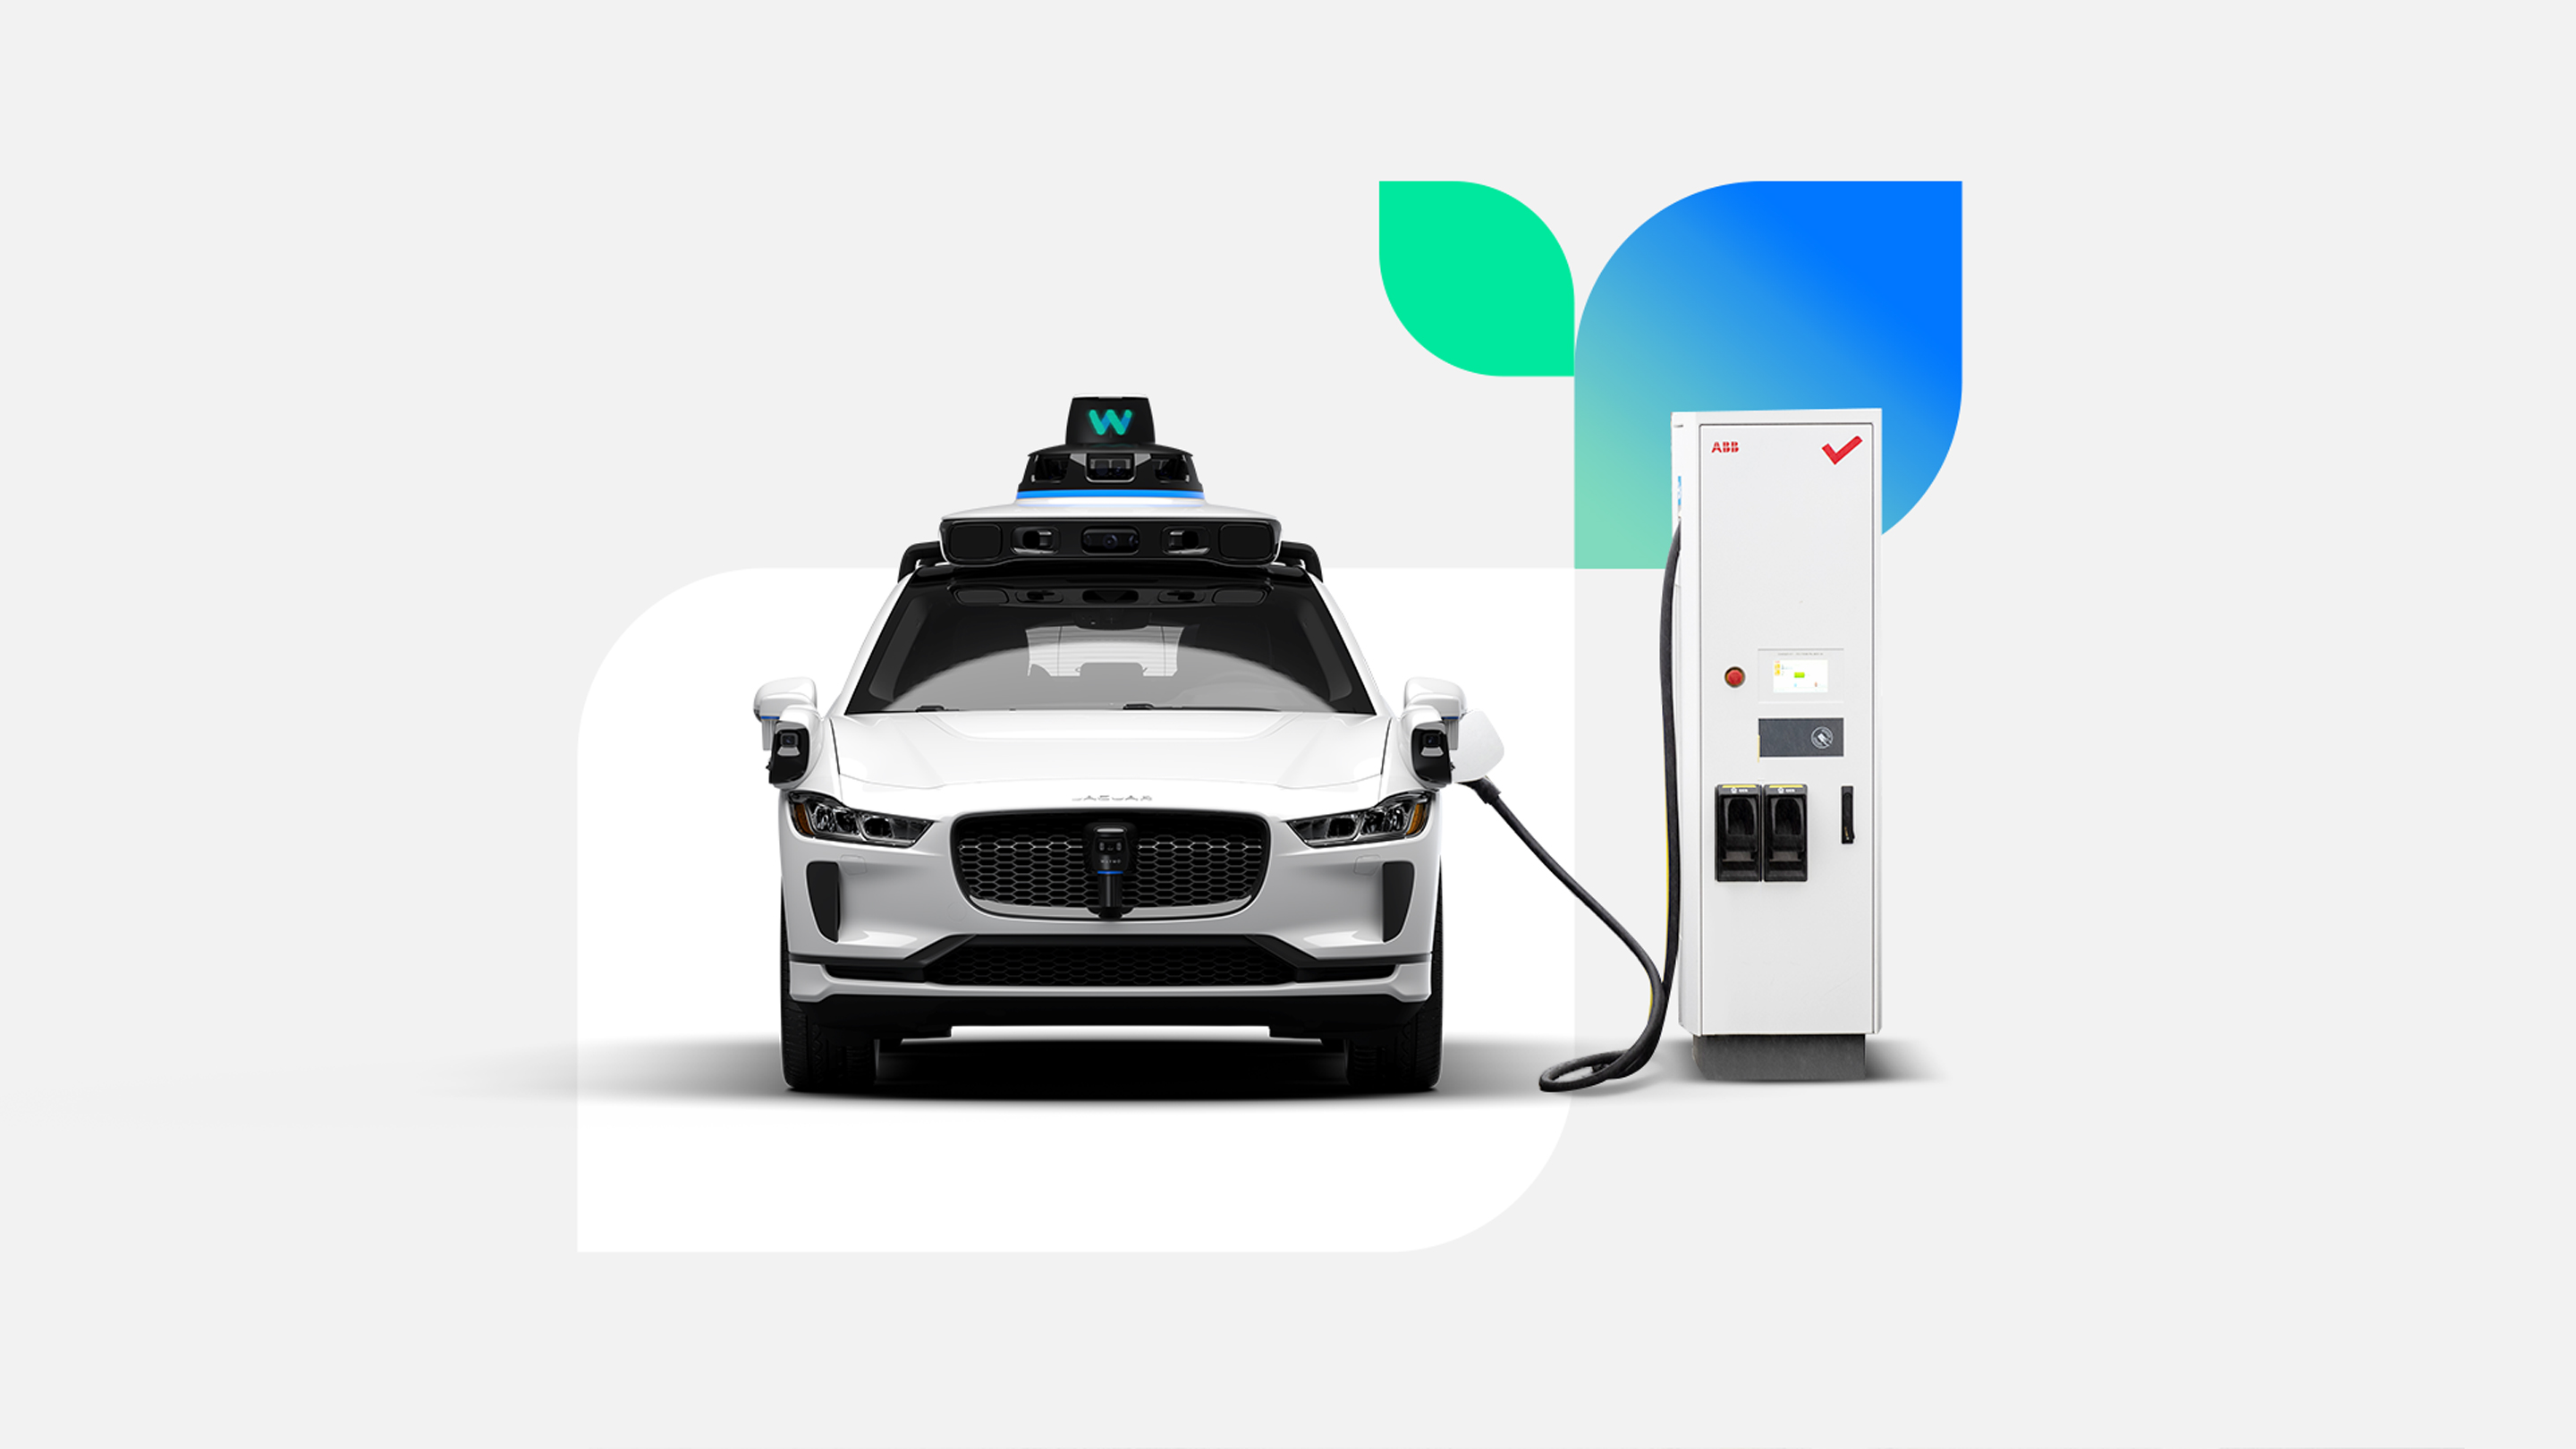 A Waymo Jaguar I-PACE charges at a charging station.